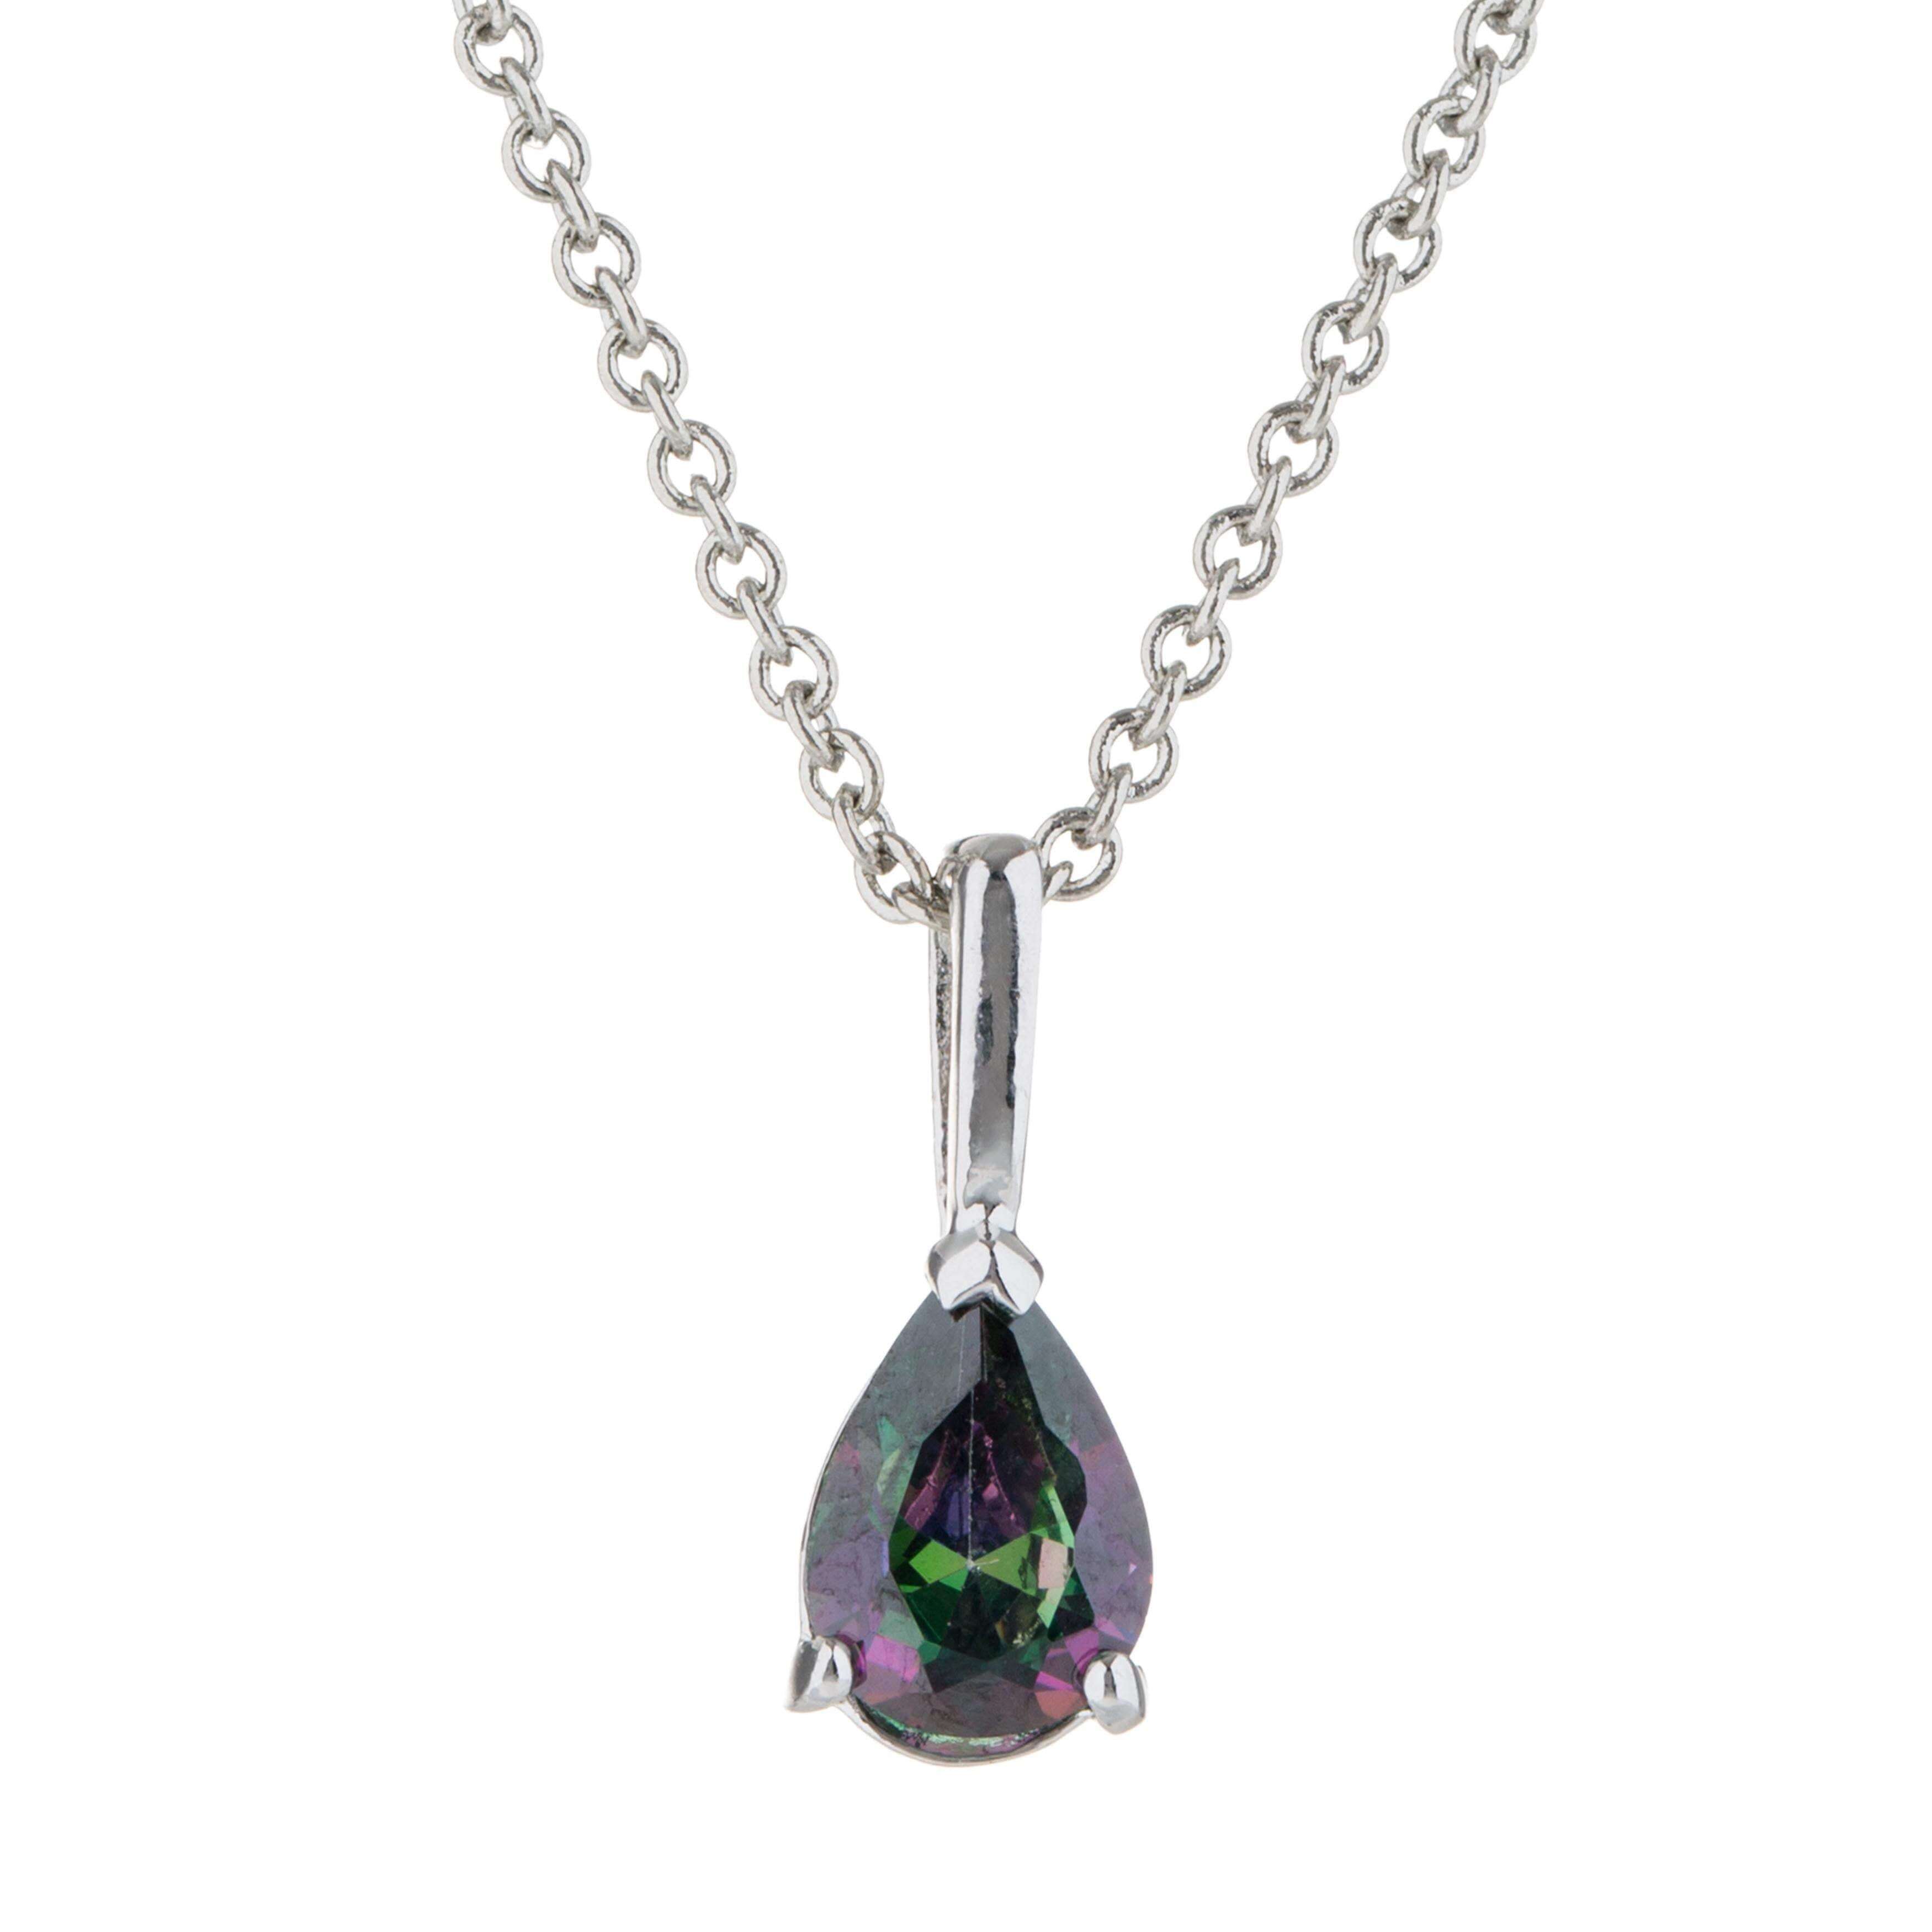 Silver Tone Mystic Pear Shaped Pendant Necklace - Shop Thrifty Treasures